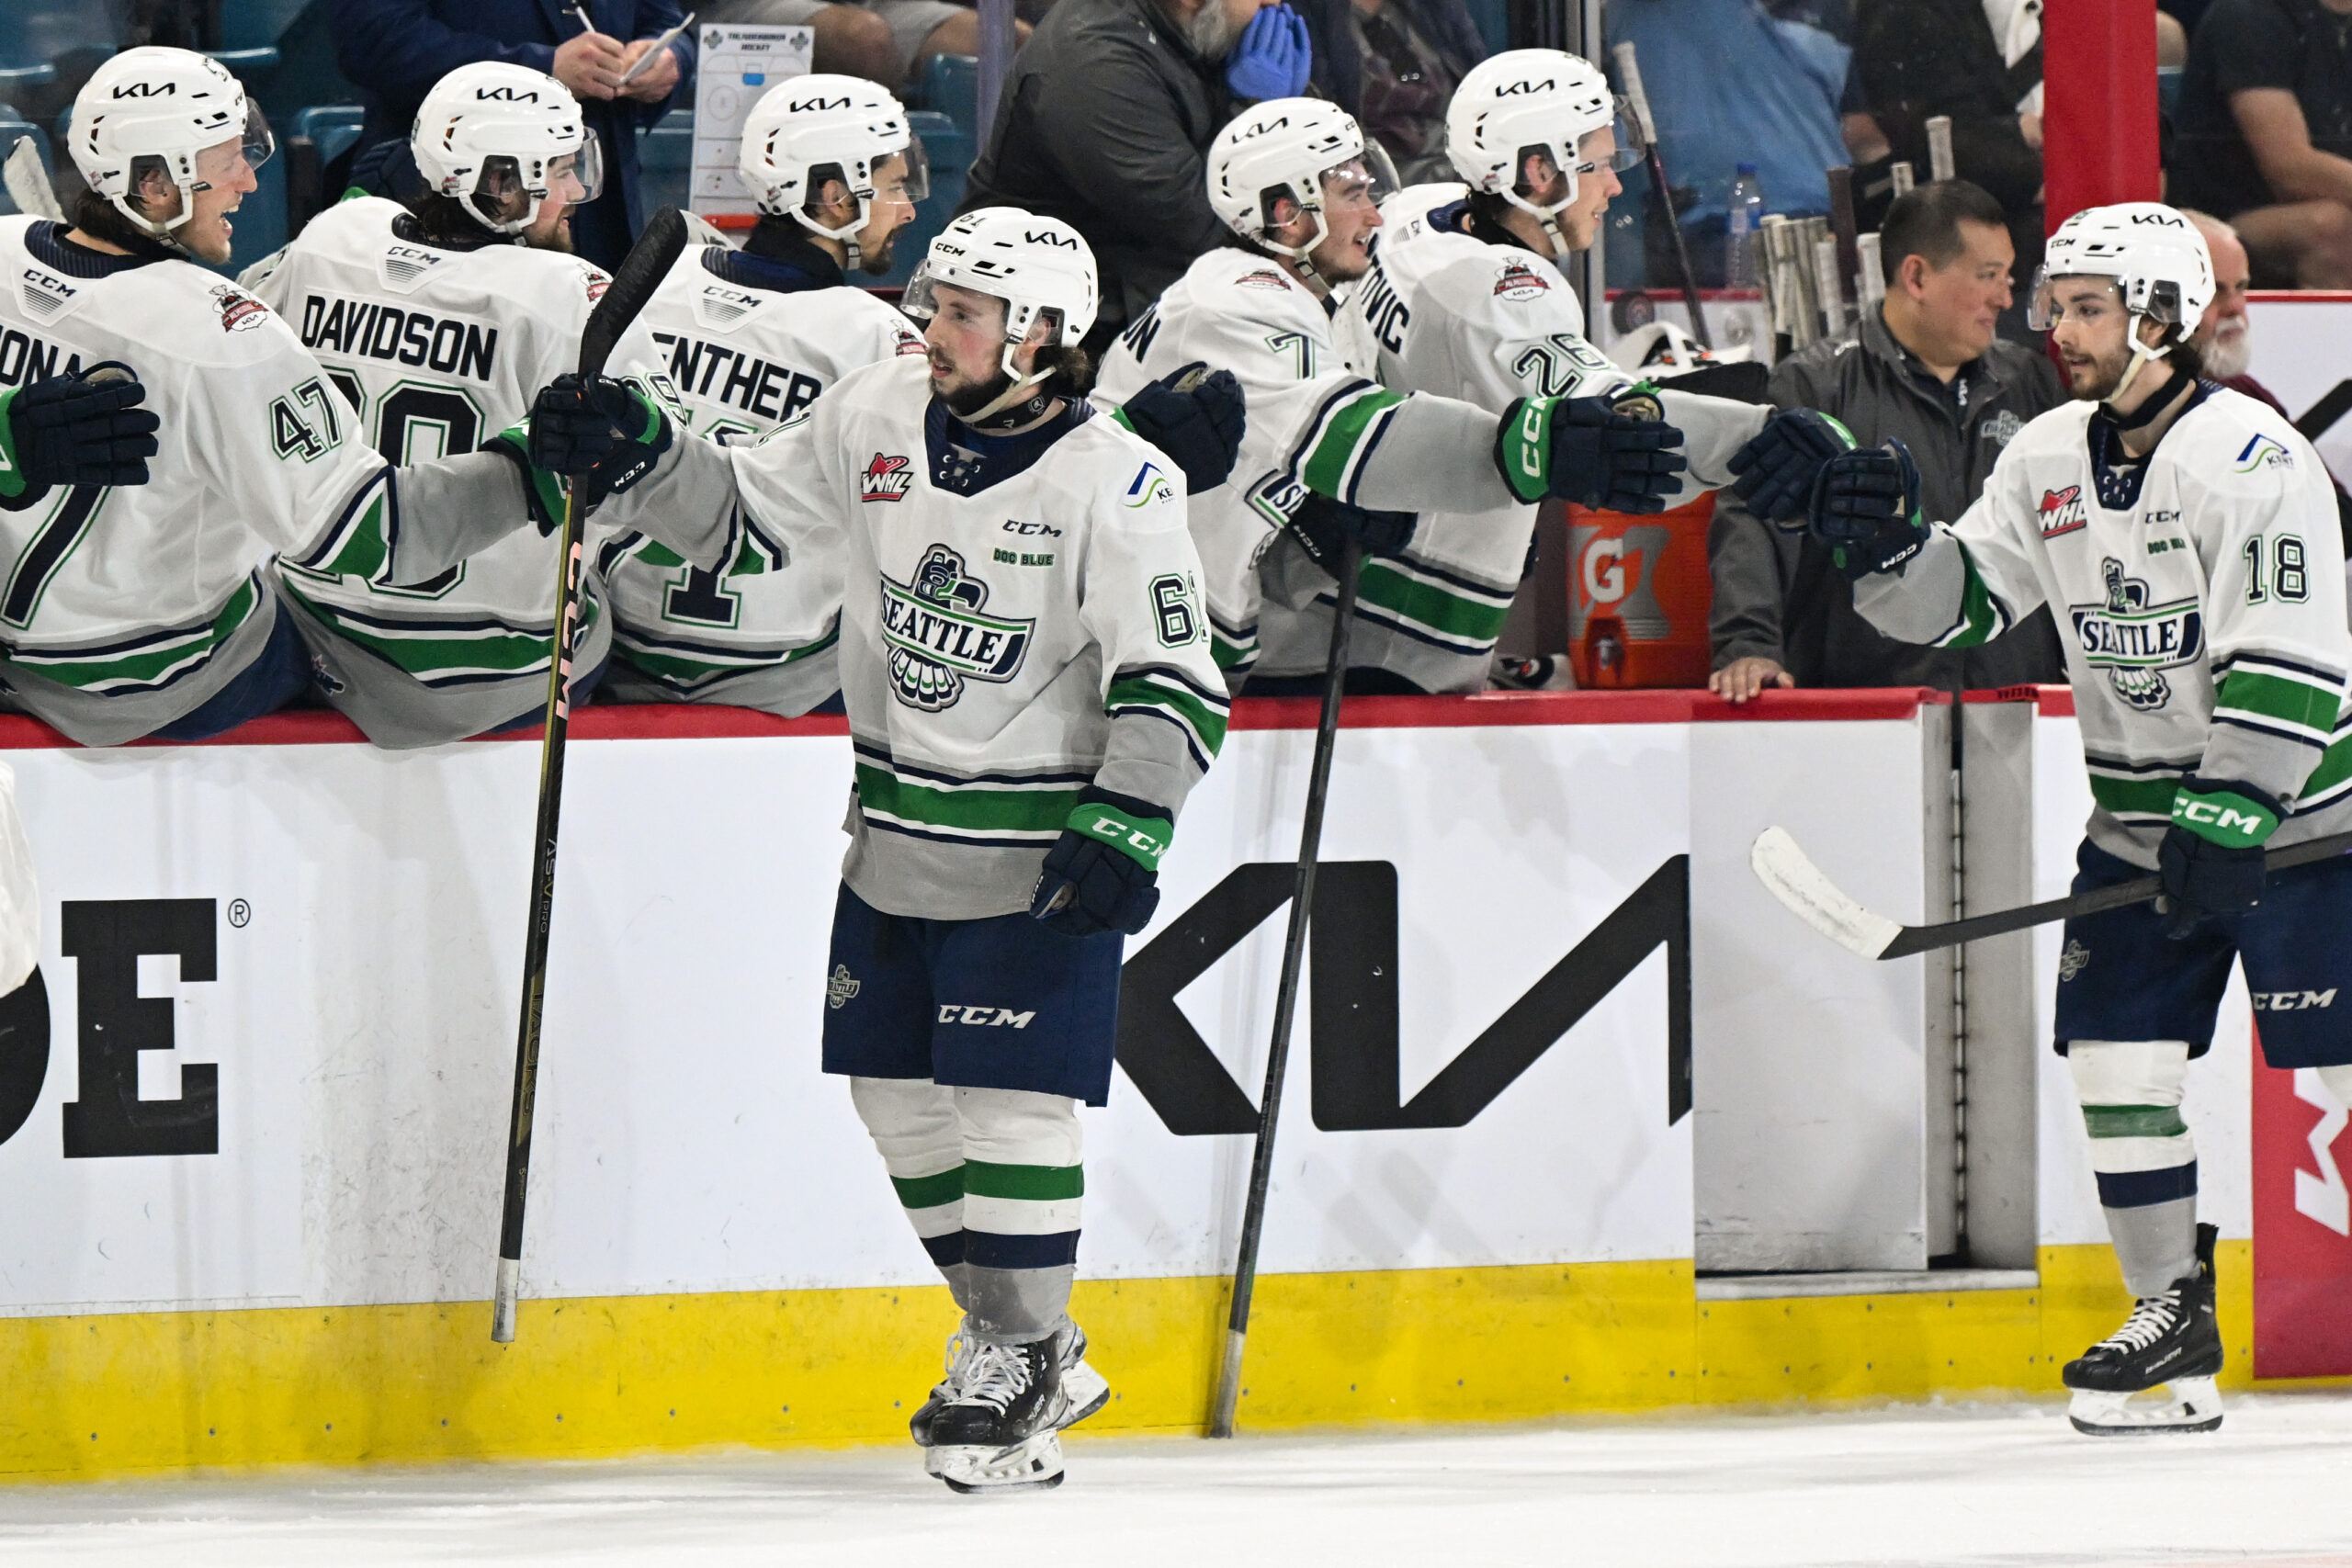 Deep Nest: First WHL title has Thunderbirds flying high – Memorial Cup